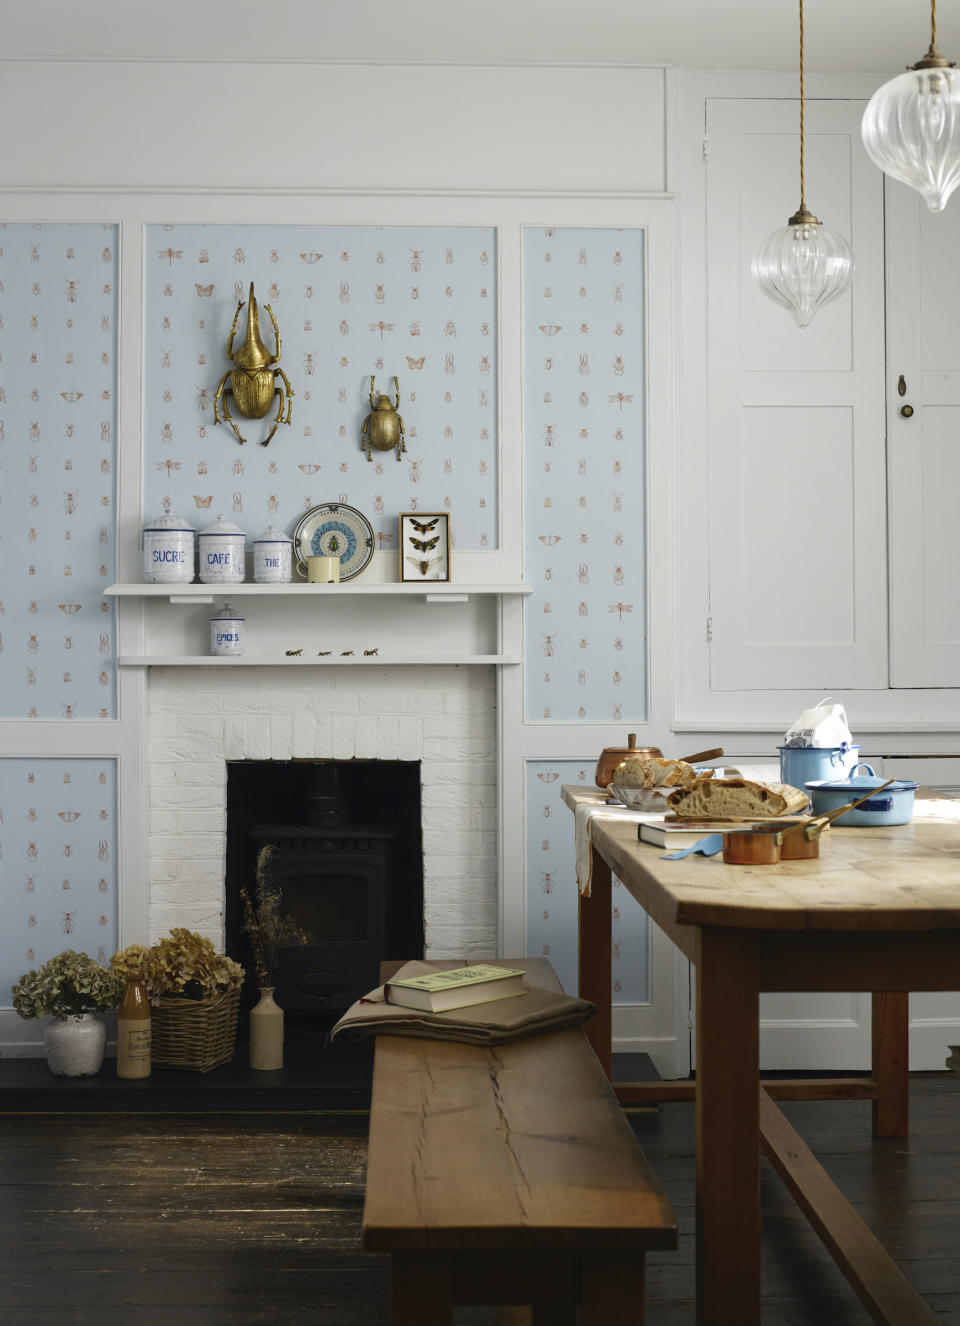 <p> Some may look at a paneled room and assume that wallpaper will not work, but this sweet space proves that is not the case. A well-chosen country kitchen wallpaper with a simple repeat pattern can add additional character to a room with plenty of period features.&#xA0; </p> <p> When choosing a country kitchen wallpaper, designer Elizabeth Ockford suggests that you bear in mind that the kitchen is the space &#x2018;where the outside and inside of the house meet &#x2013; be that fruit and vegetables or flowers coming in from the garden, or where the family and pets gather to cozy up after a country walk or over a long lunch. And wallpaper in that room can reflect that, in color and subject matter.&apos; </p> <p> In Ockford&apos;s Cleo wallpaper, you get a large variety of common or garden bugs, delicately drawn onto clean-colored grounds. </p>